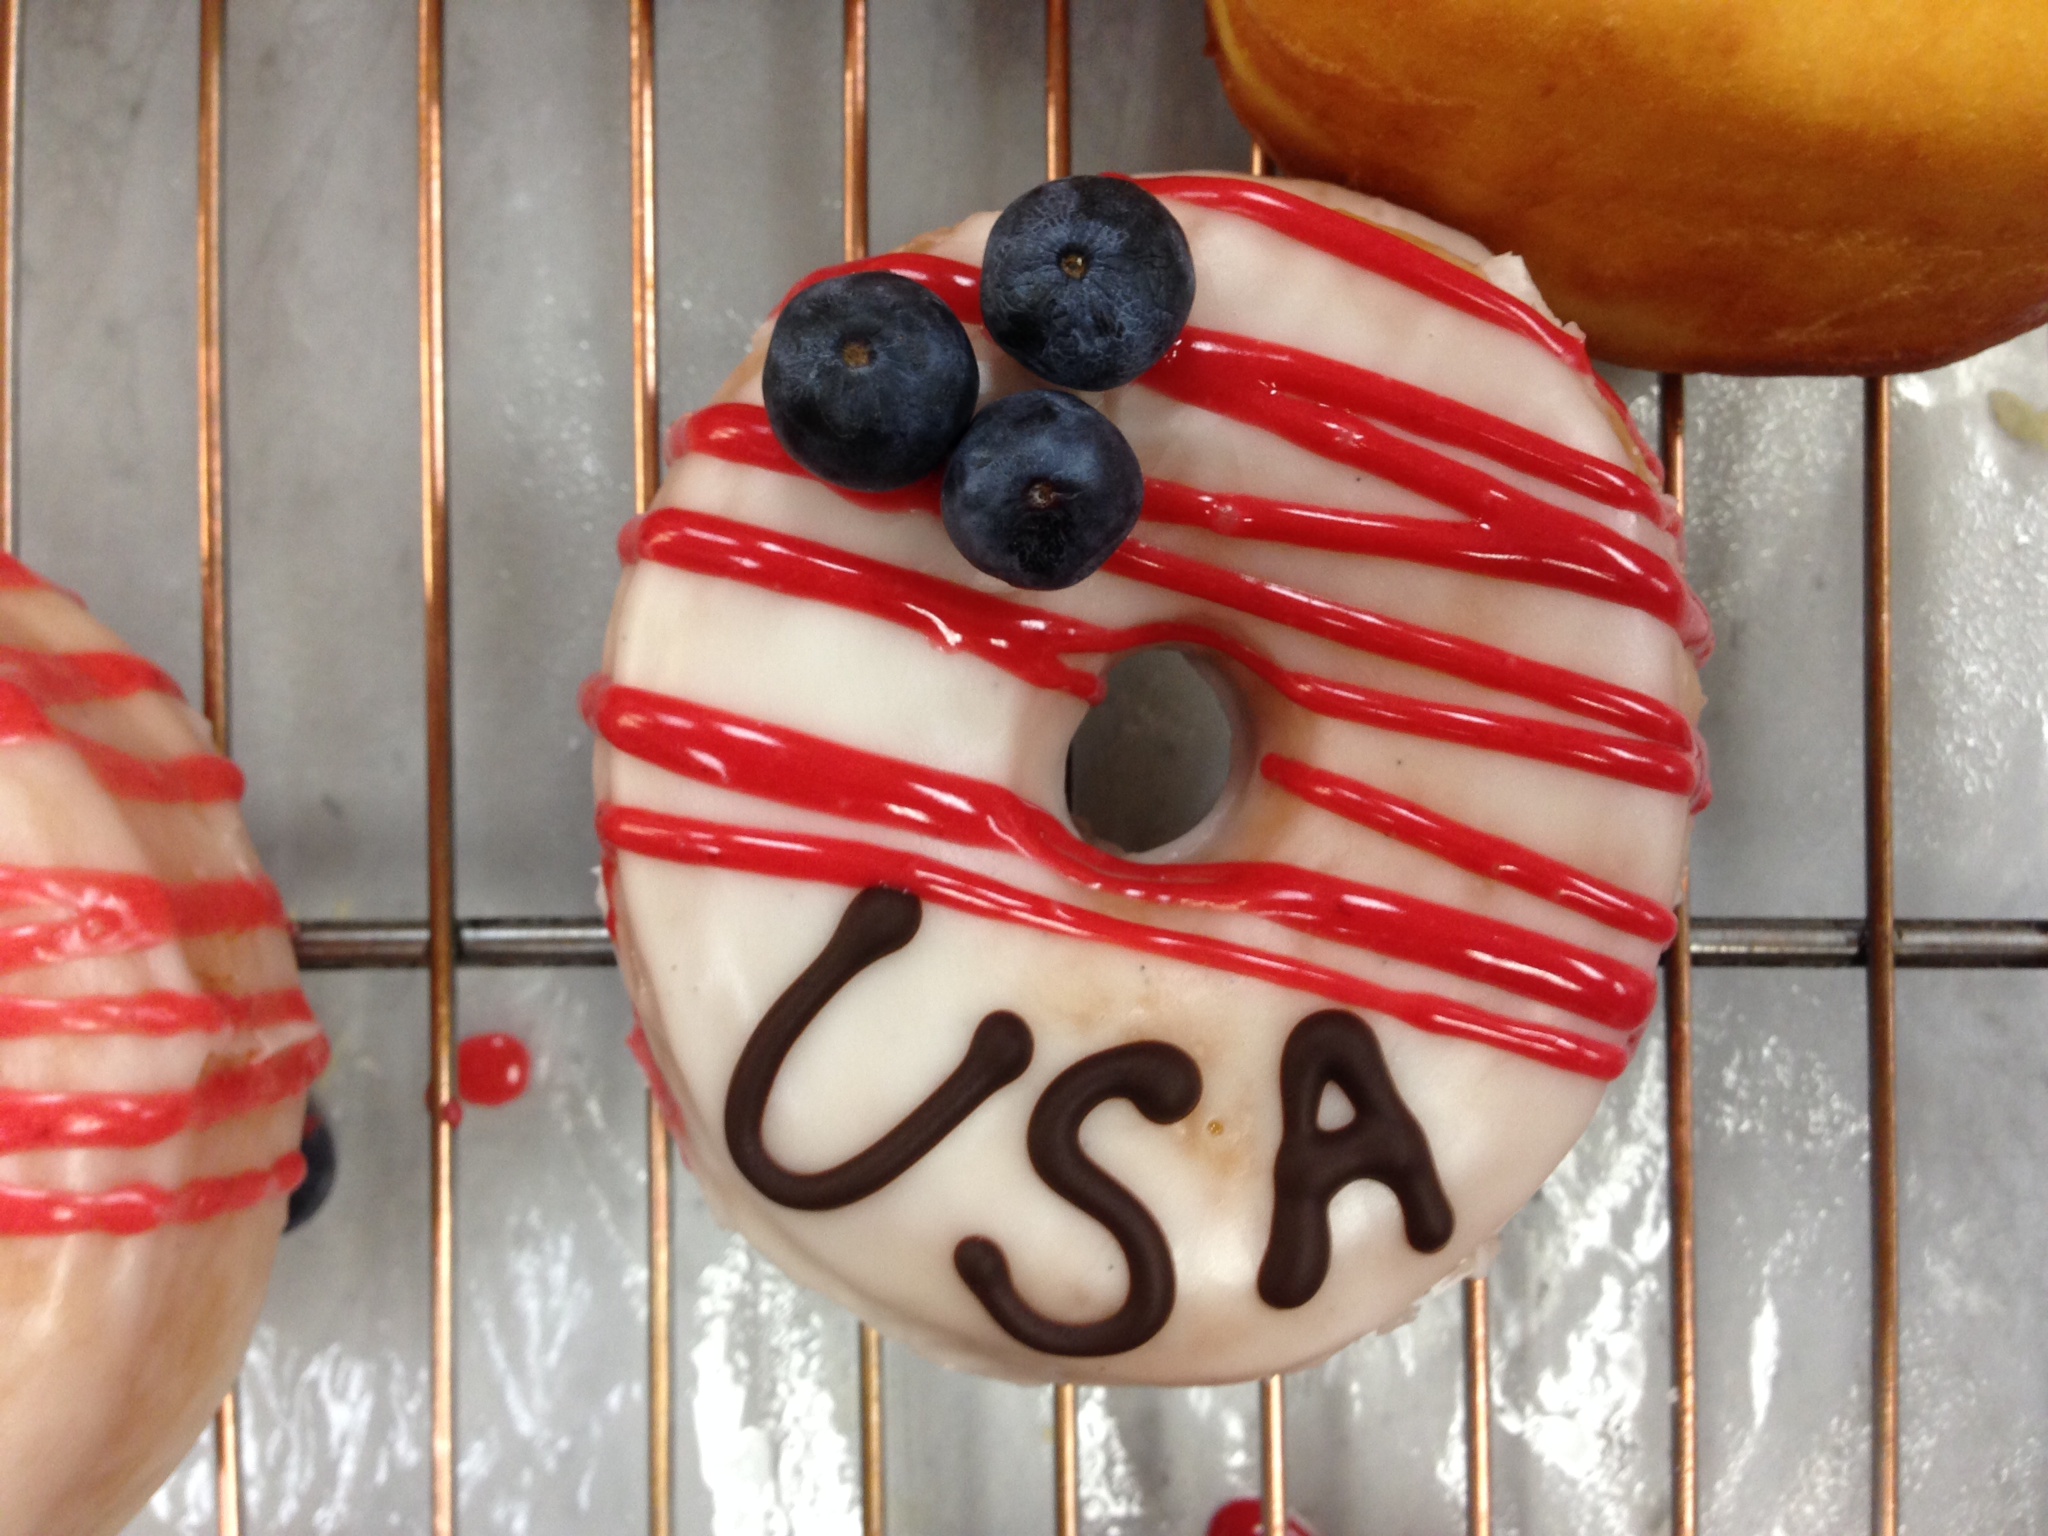 Astro Doughnuts & Fried Chicken is offering a special USA doughnut on July 4. (Photo: Astro Doughnuts & Fried Chicken)